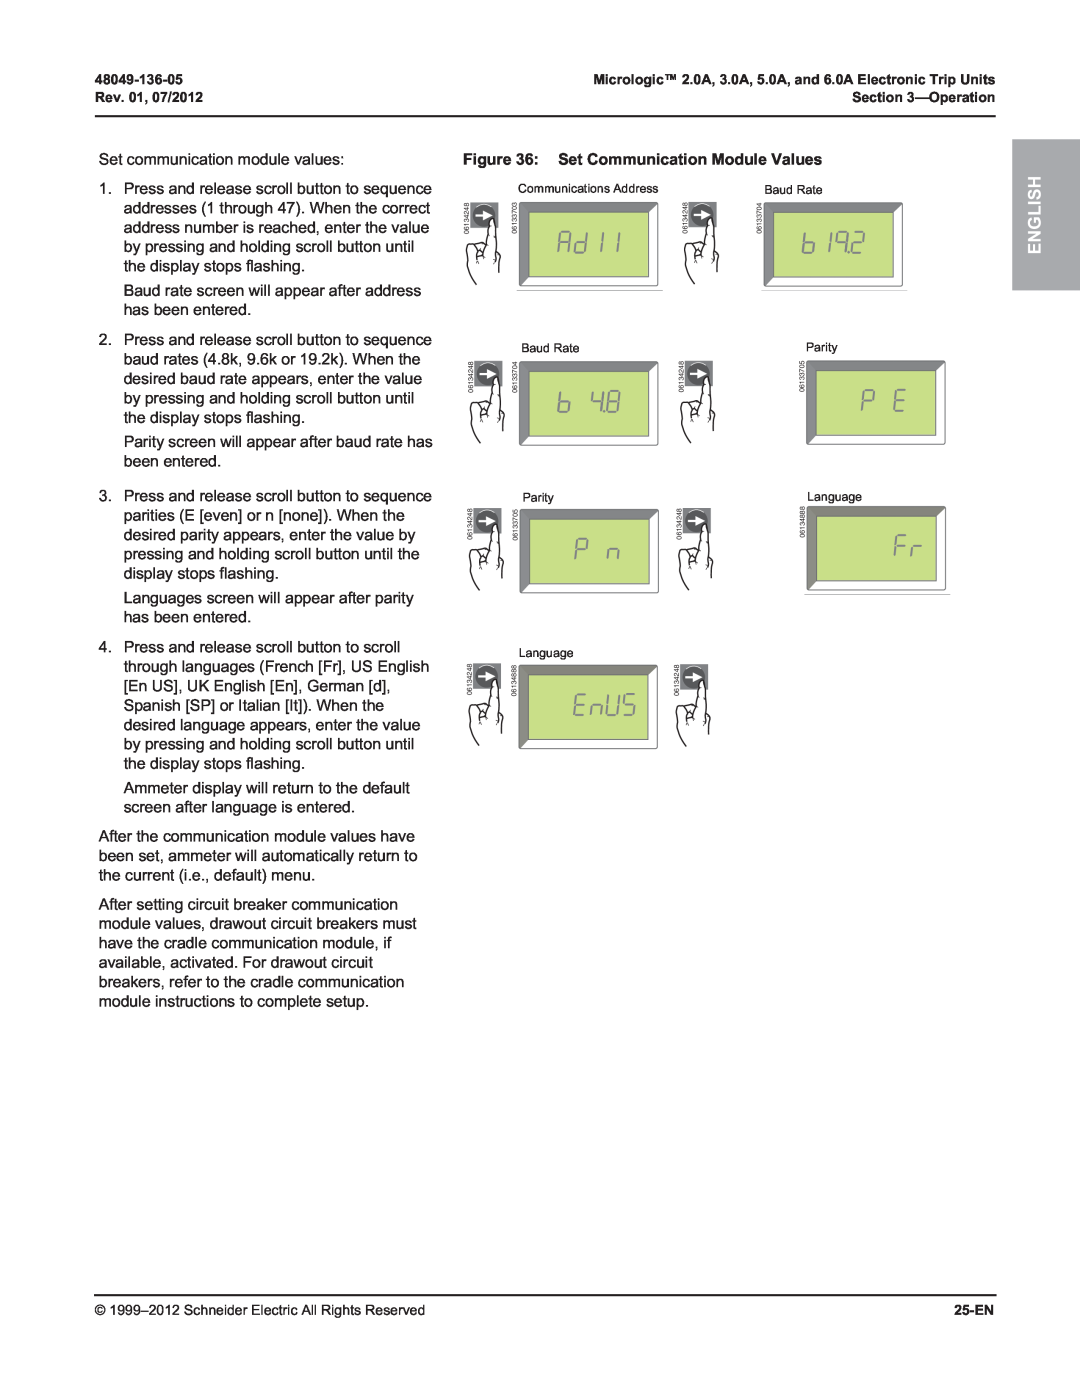 Schneider Electric 5.0A, 3.0A, 2.0A, and 6.0A manual Set Communication Module Values, English 